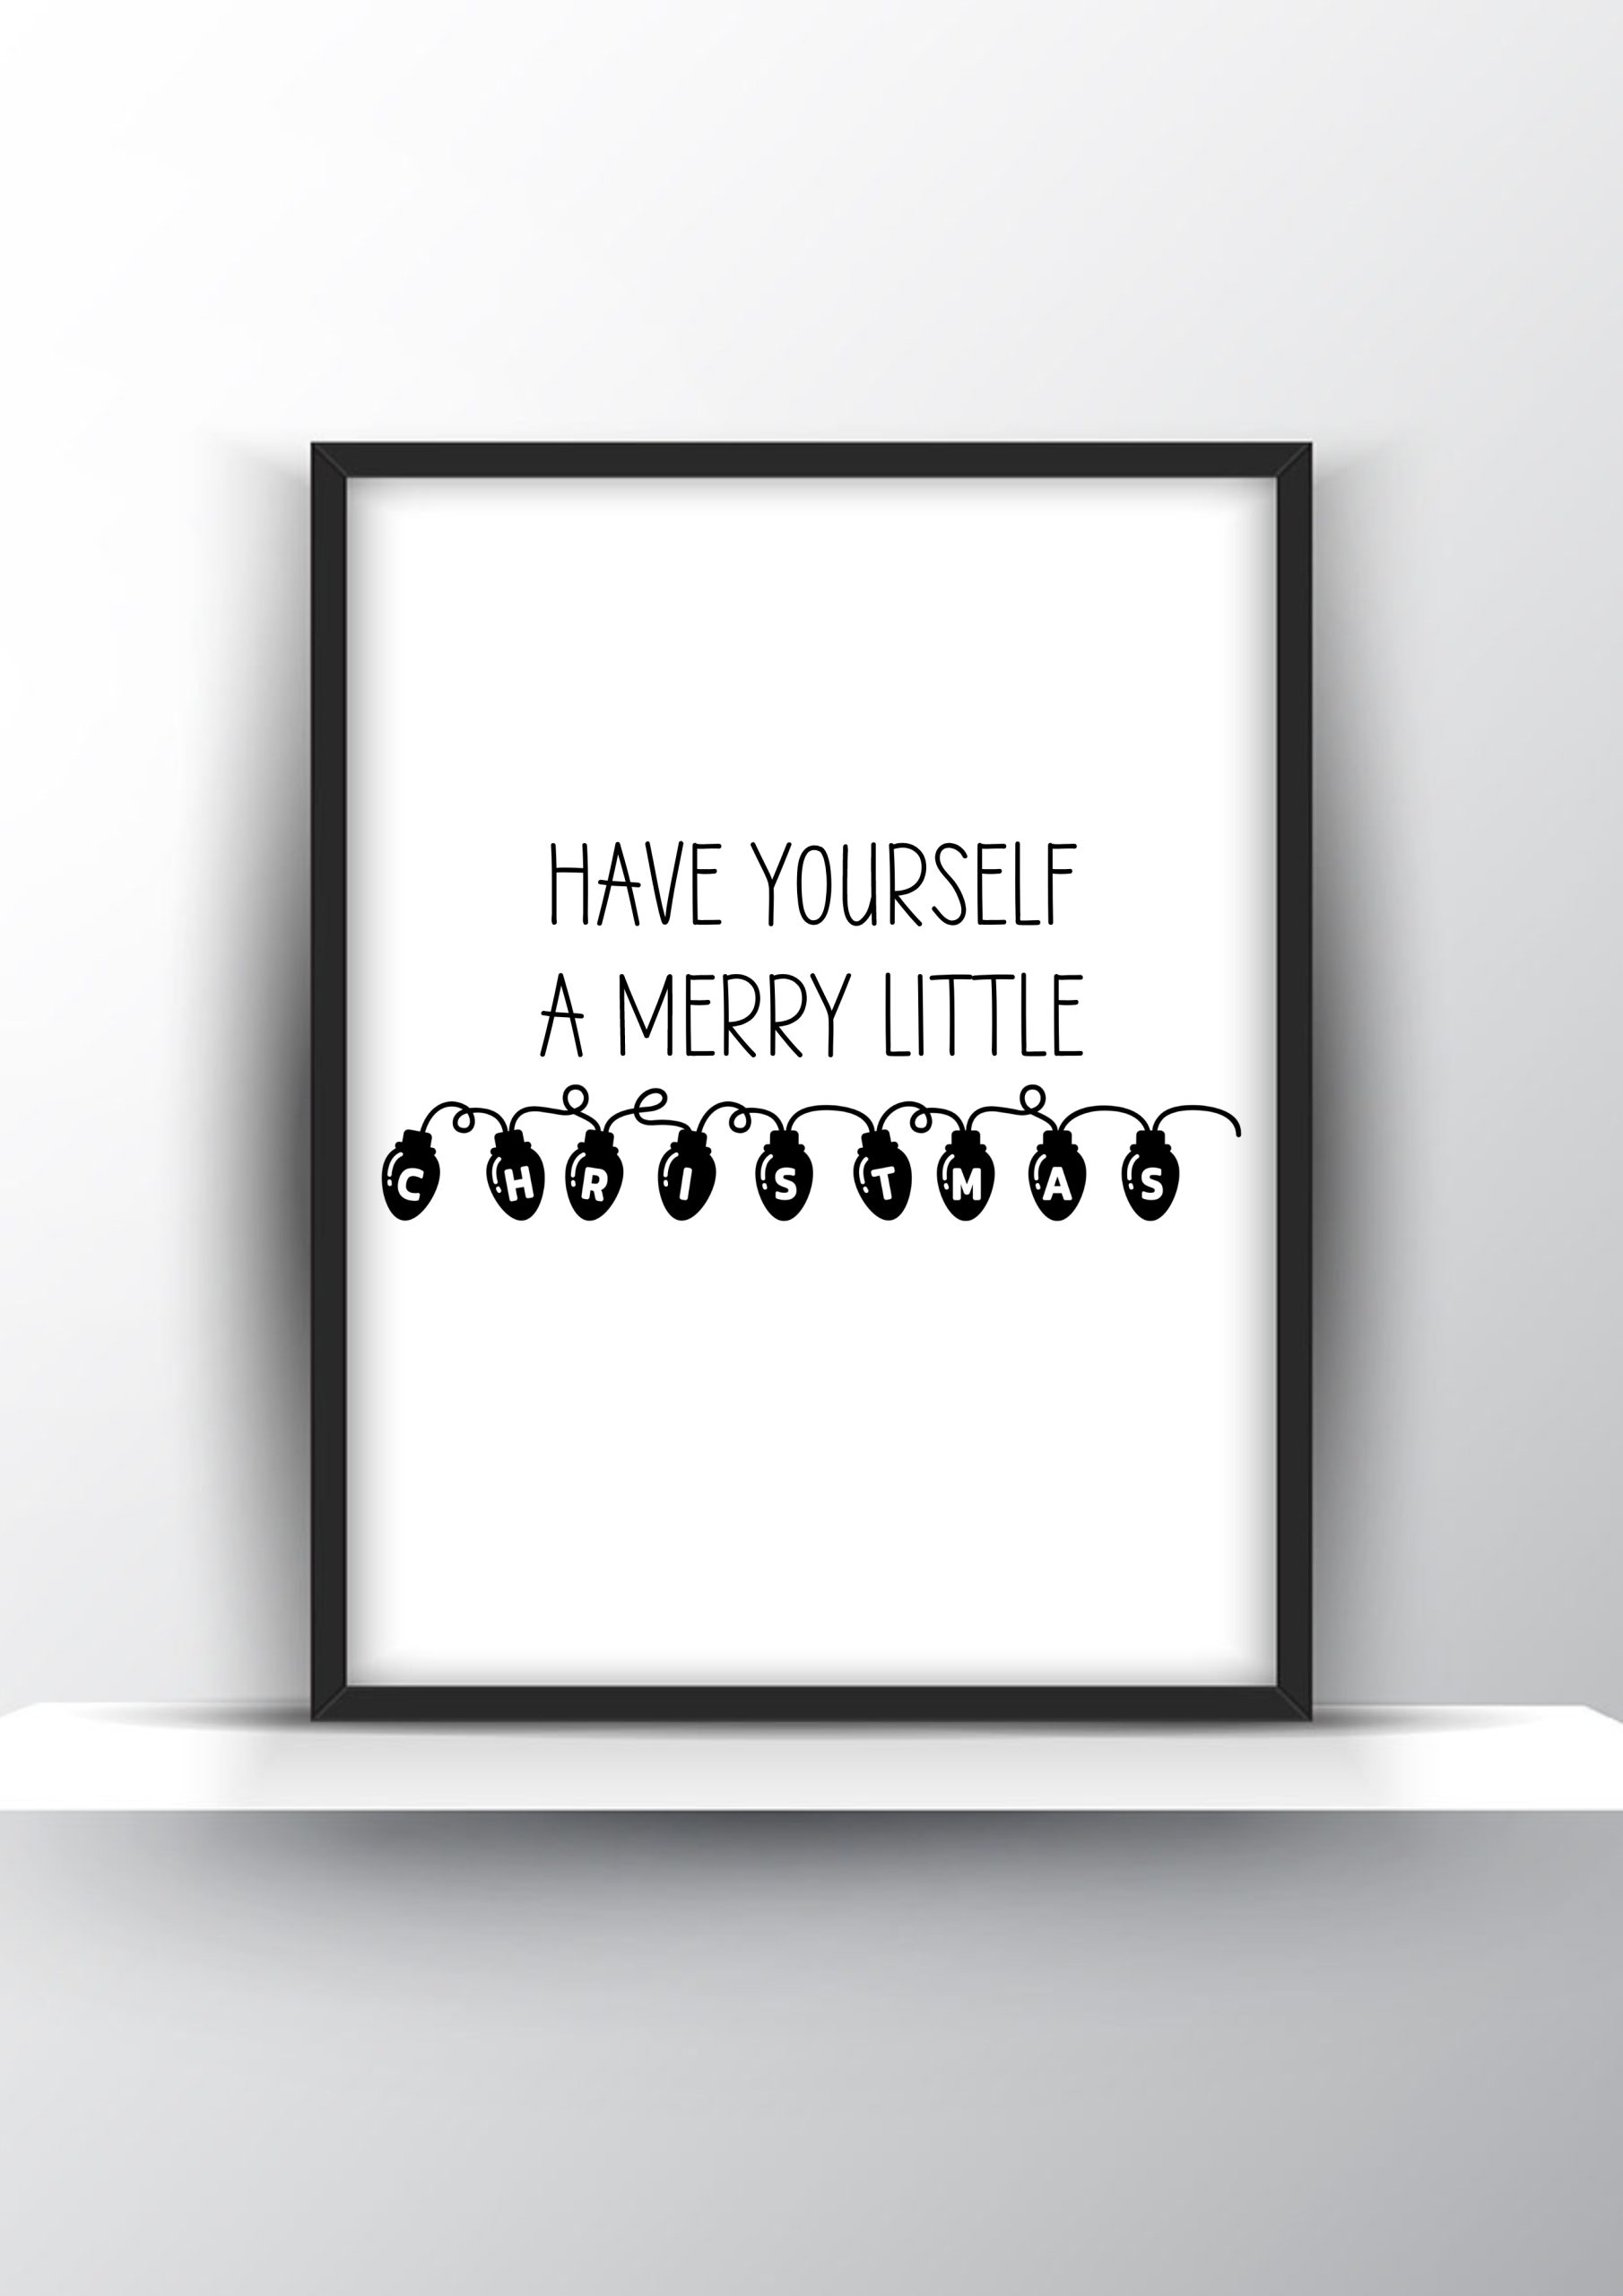 Have Yourself a Very Merry Little Christmas Printable Wall Art